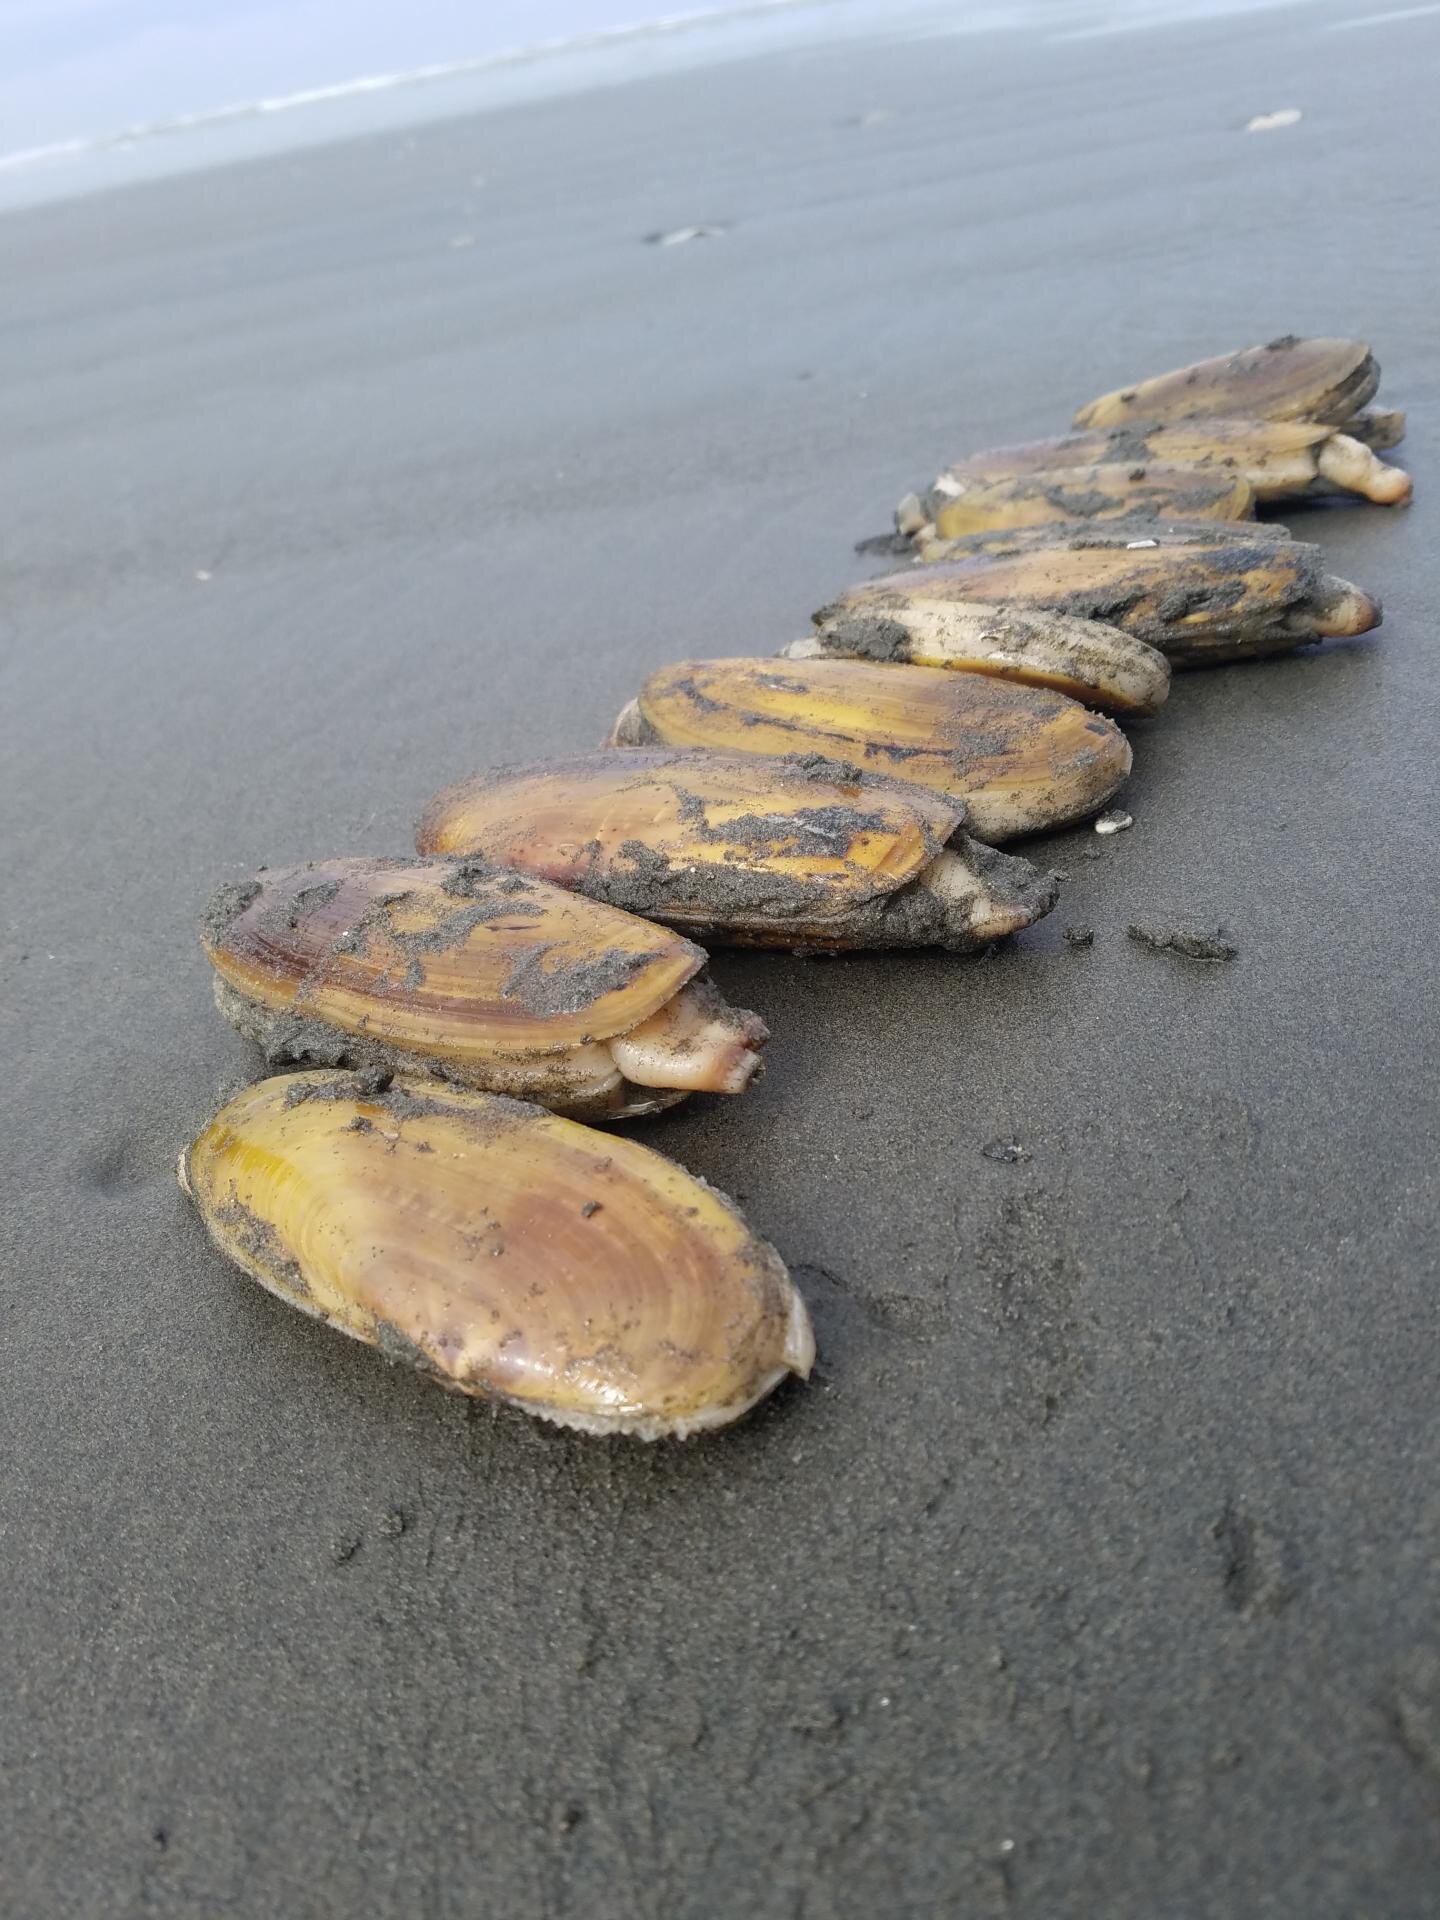 Even razor clams on sparsely populated Olympic Coast can't escape plastics, study finds